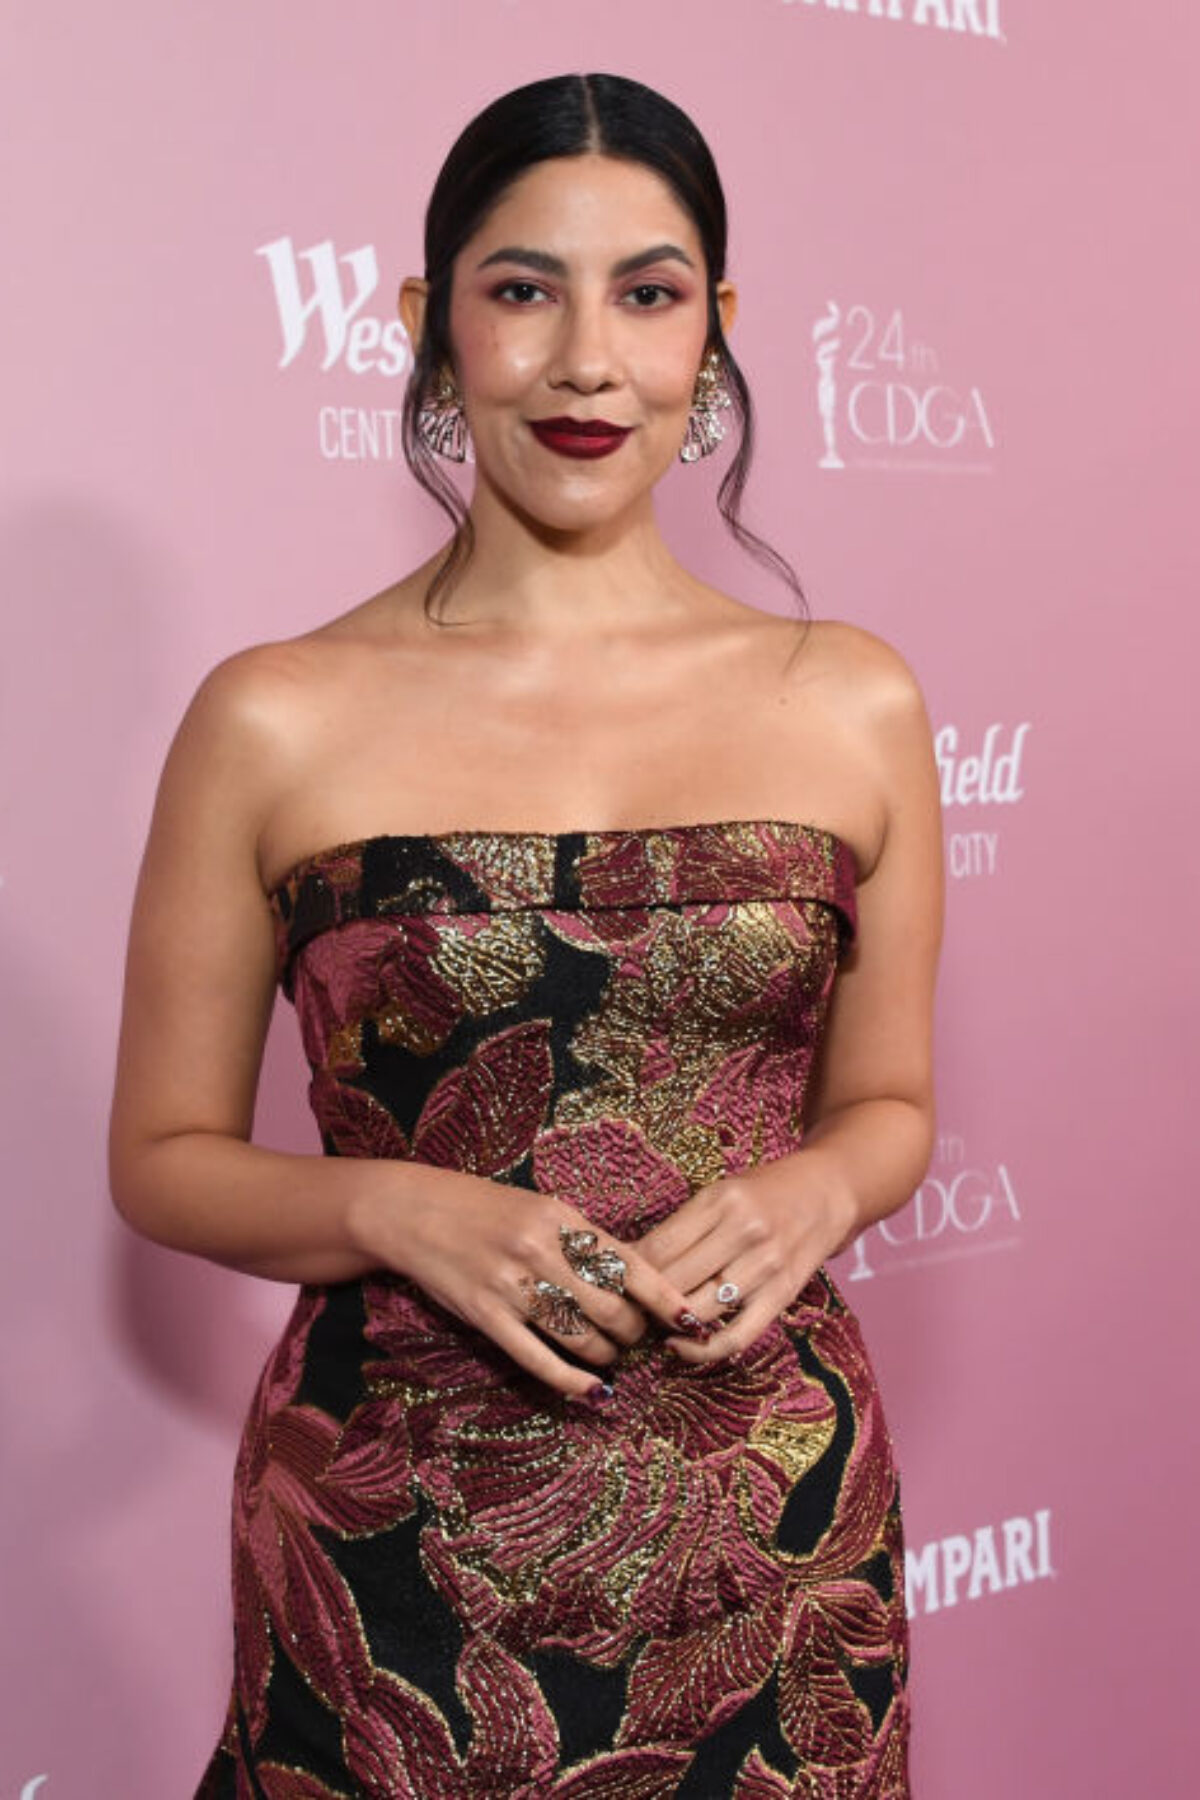 SANTA MONICA, CALIFORNIA - MARCH 09: Stephanie Beatriz attends the 24th Costume Designers Guild Awards at The Eli and Edythe Broad Stage on March 09, 2022 in Santa Monica, California. (Photo by Jon Kopaloff/Getty Images for CDGA)